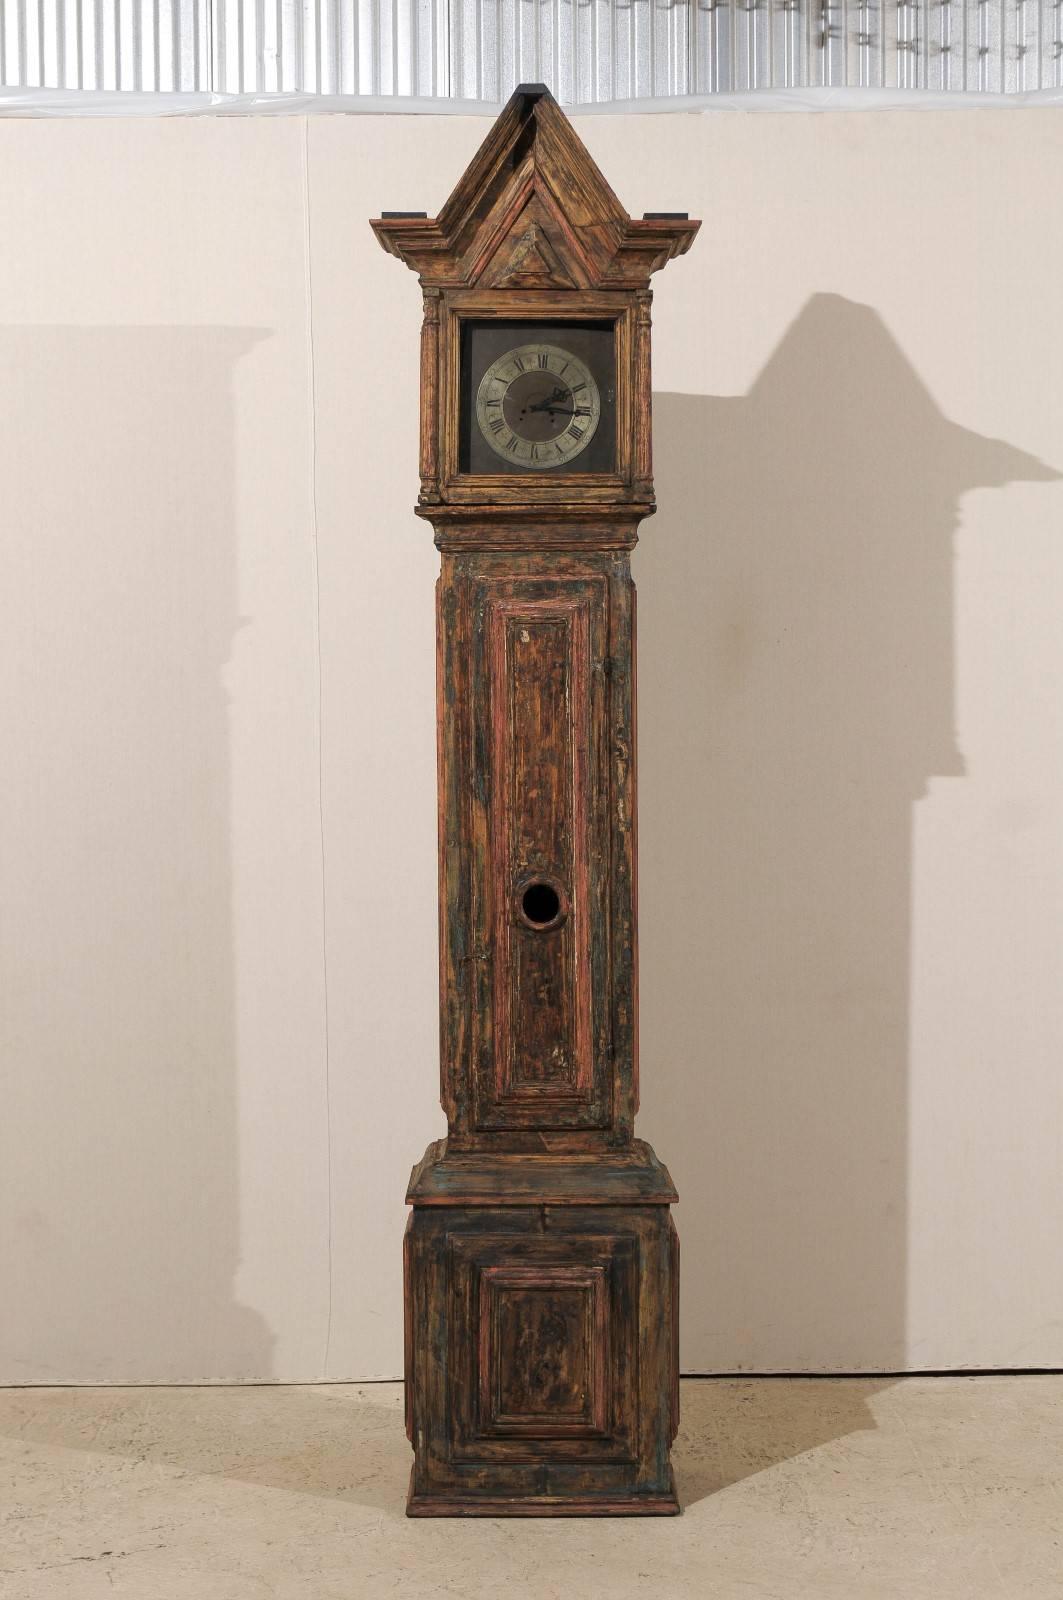 An 18th century Swedish clock. This Swedish wooden clock with linear profile a square head topped with a triangular shape crest. This clock retains it's original metal face, hands and movement.  The face, featuring a pewter ring with Roman and